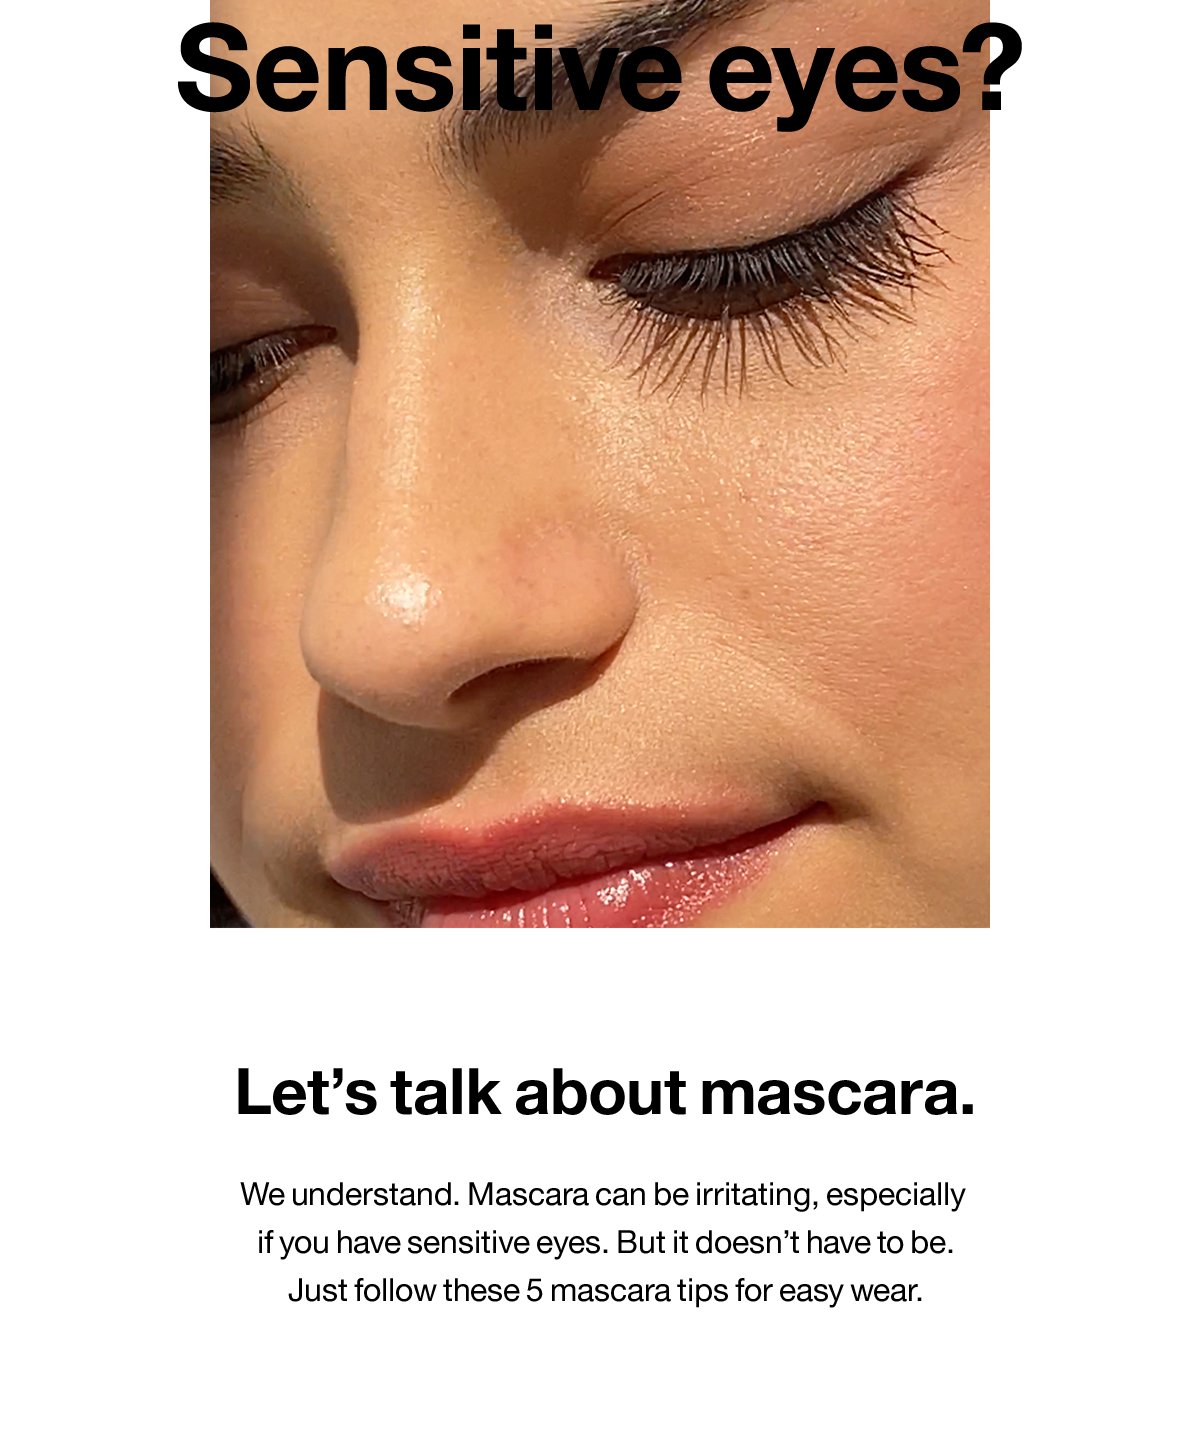 Sensitive eyes? Let's talk about mascara. We understand. Mascara can be irritating, especially if you have sensitive eyes. But it doesn't have to be. Just follow these 5 mascara tips for easy wear.